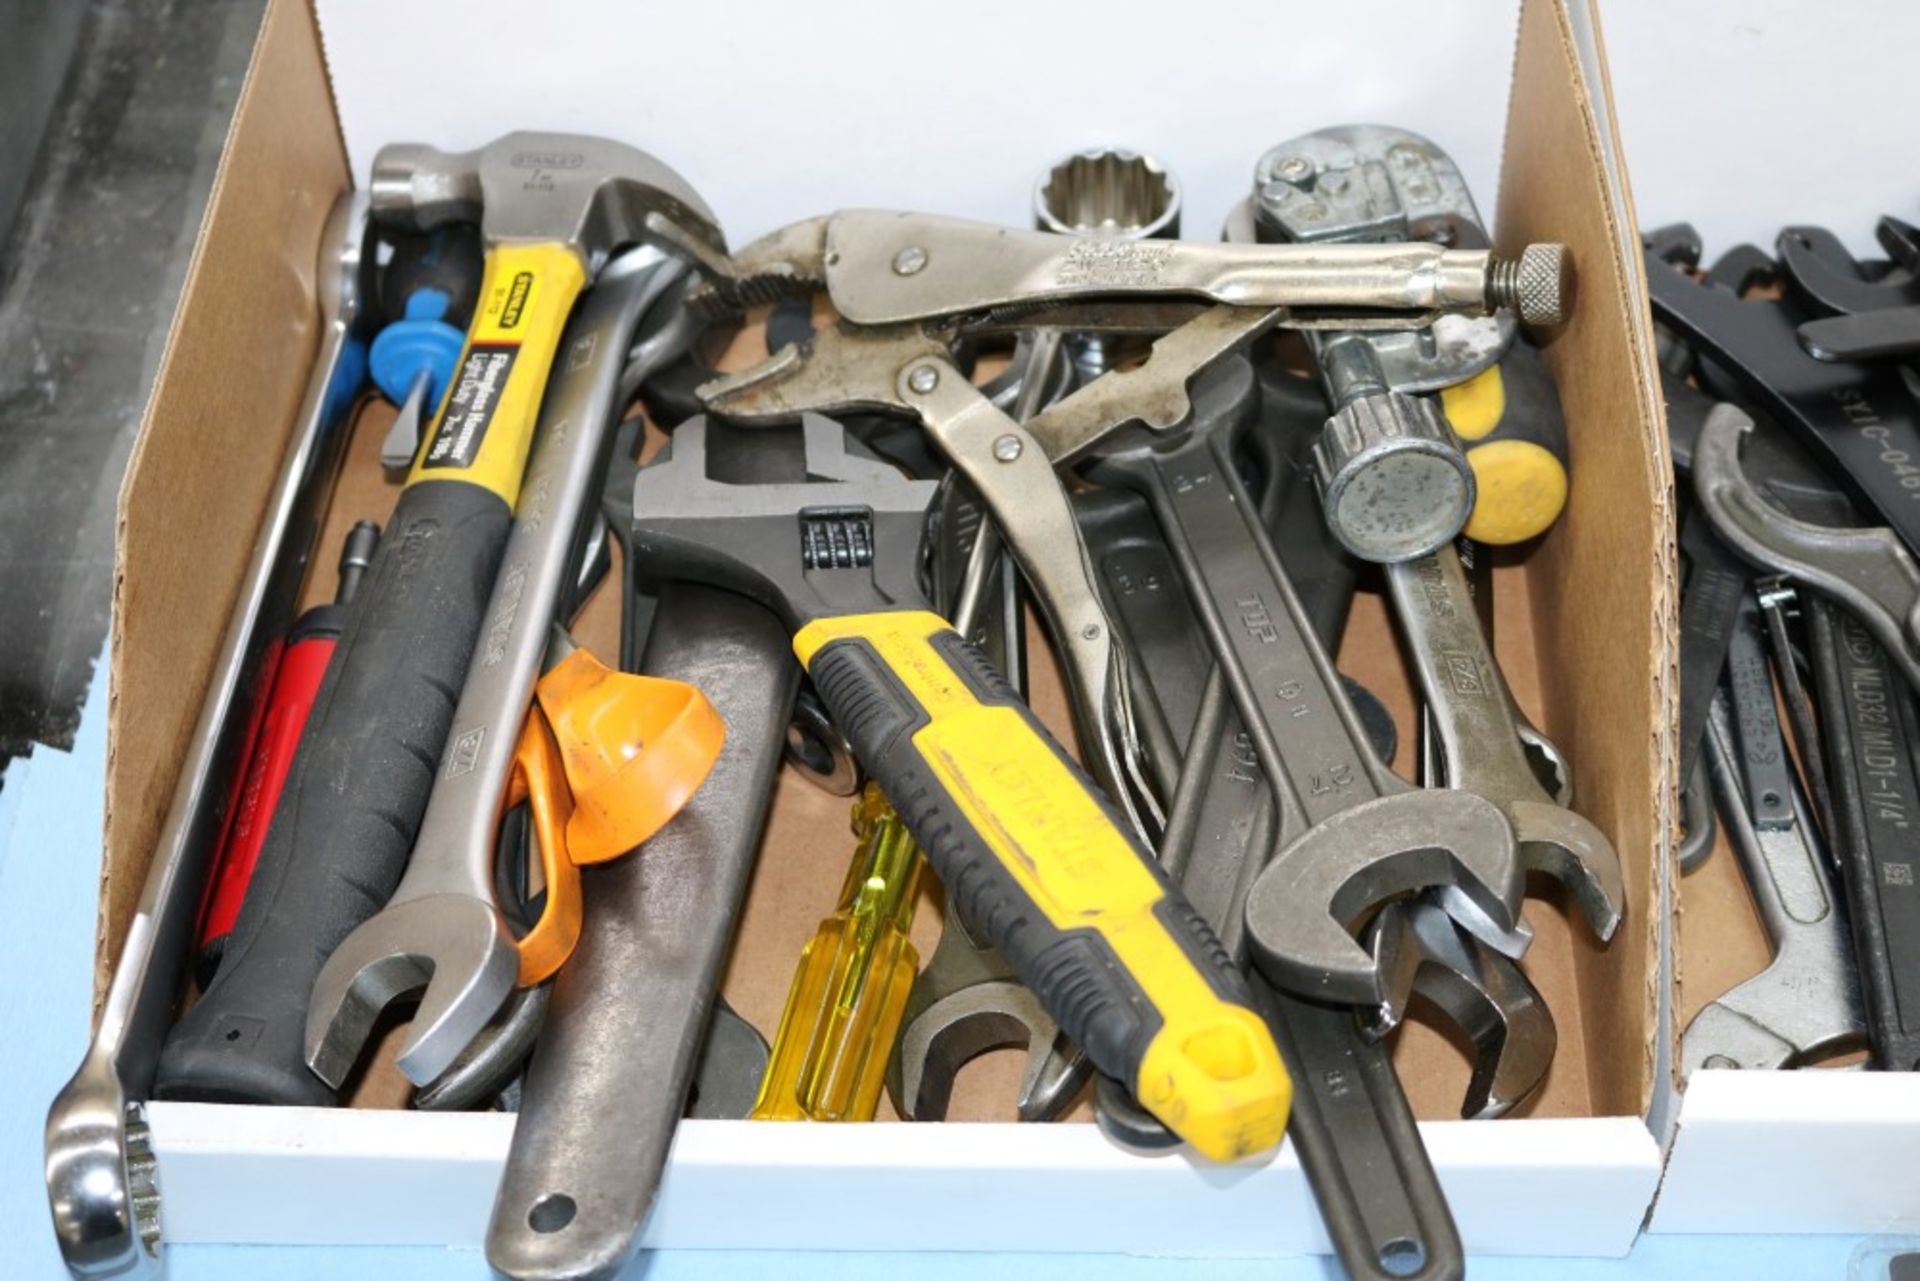 2 Boxes of Various Wrenches, Hammers, ER-32 Wrenches, CAT 40 Wrenches and Others - Image 2 of 5